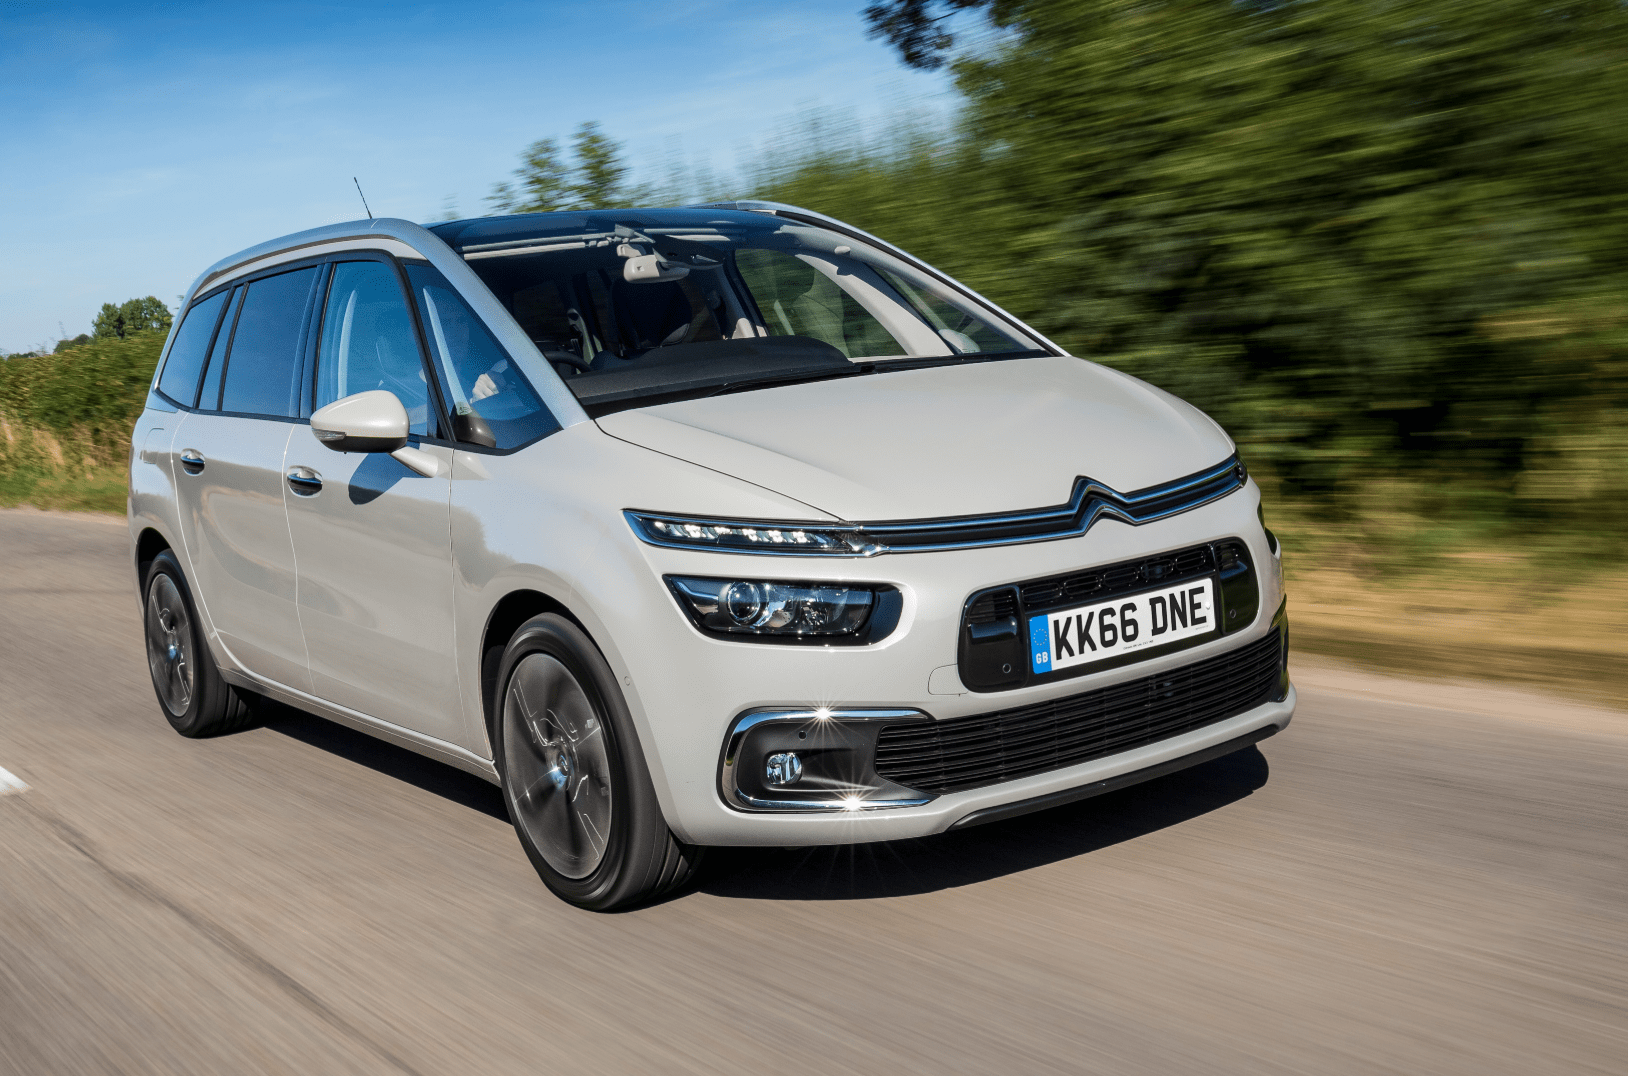 Grey Citroën  C4 Picasso driving on a road surrounded by trees